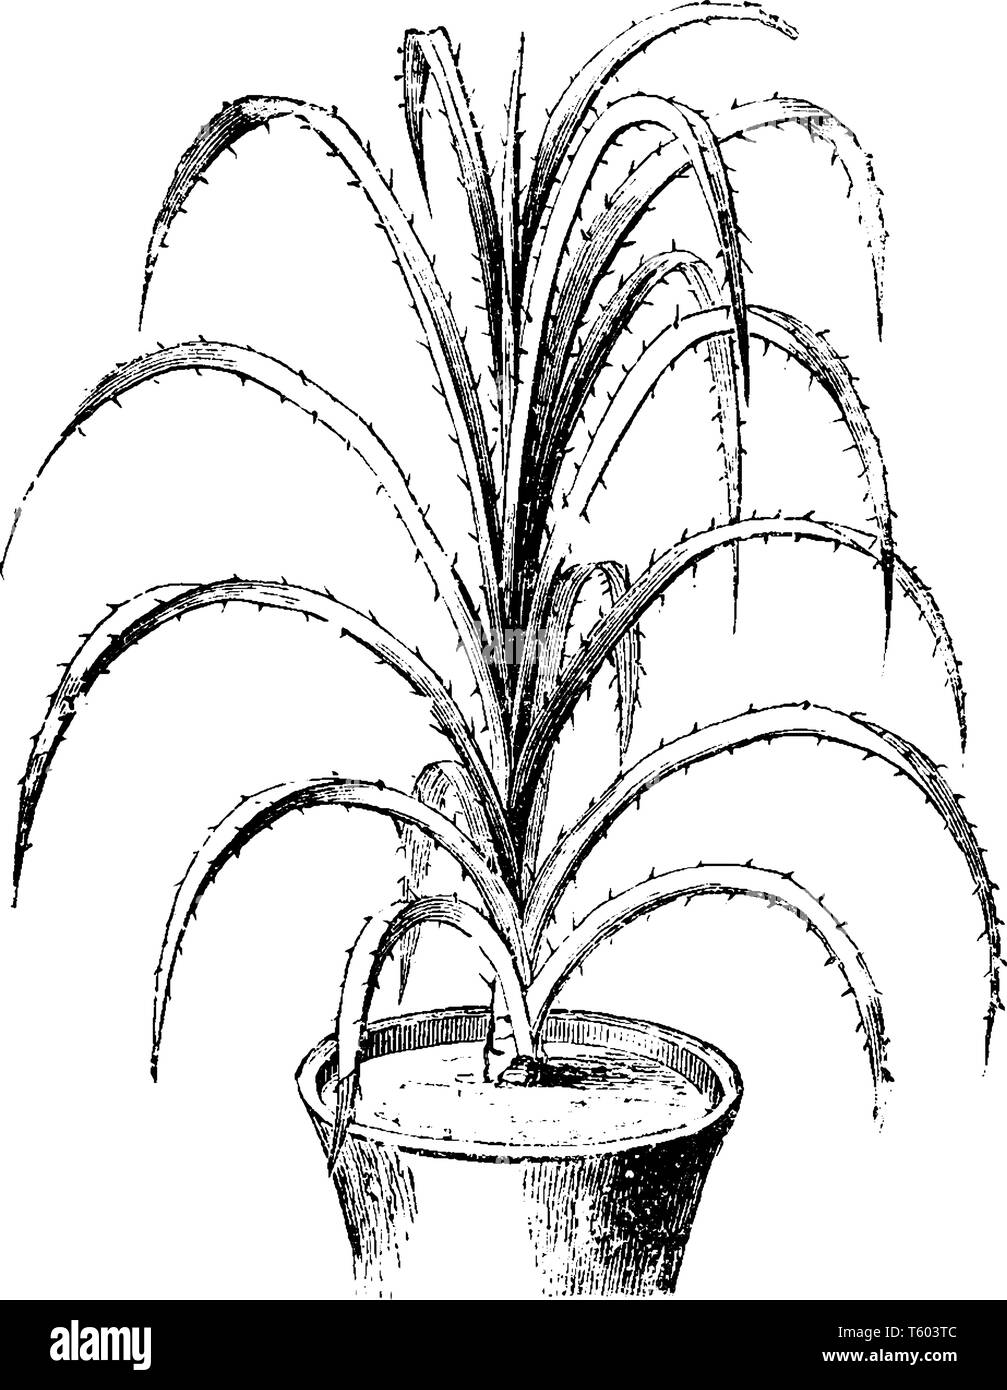 A picture showing a Pandanus Odoratissimus. This is from Pandanaceae family. Leaves are glaucous, 40-70 cm. long and thorny, vintage line drawing or e Stock Vector